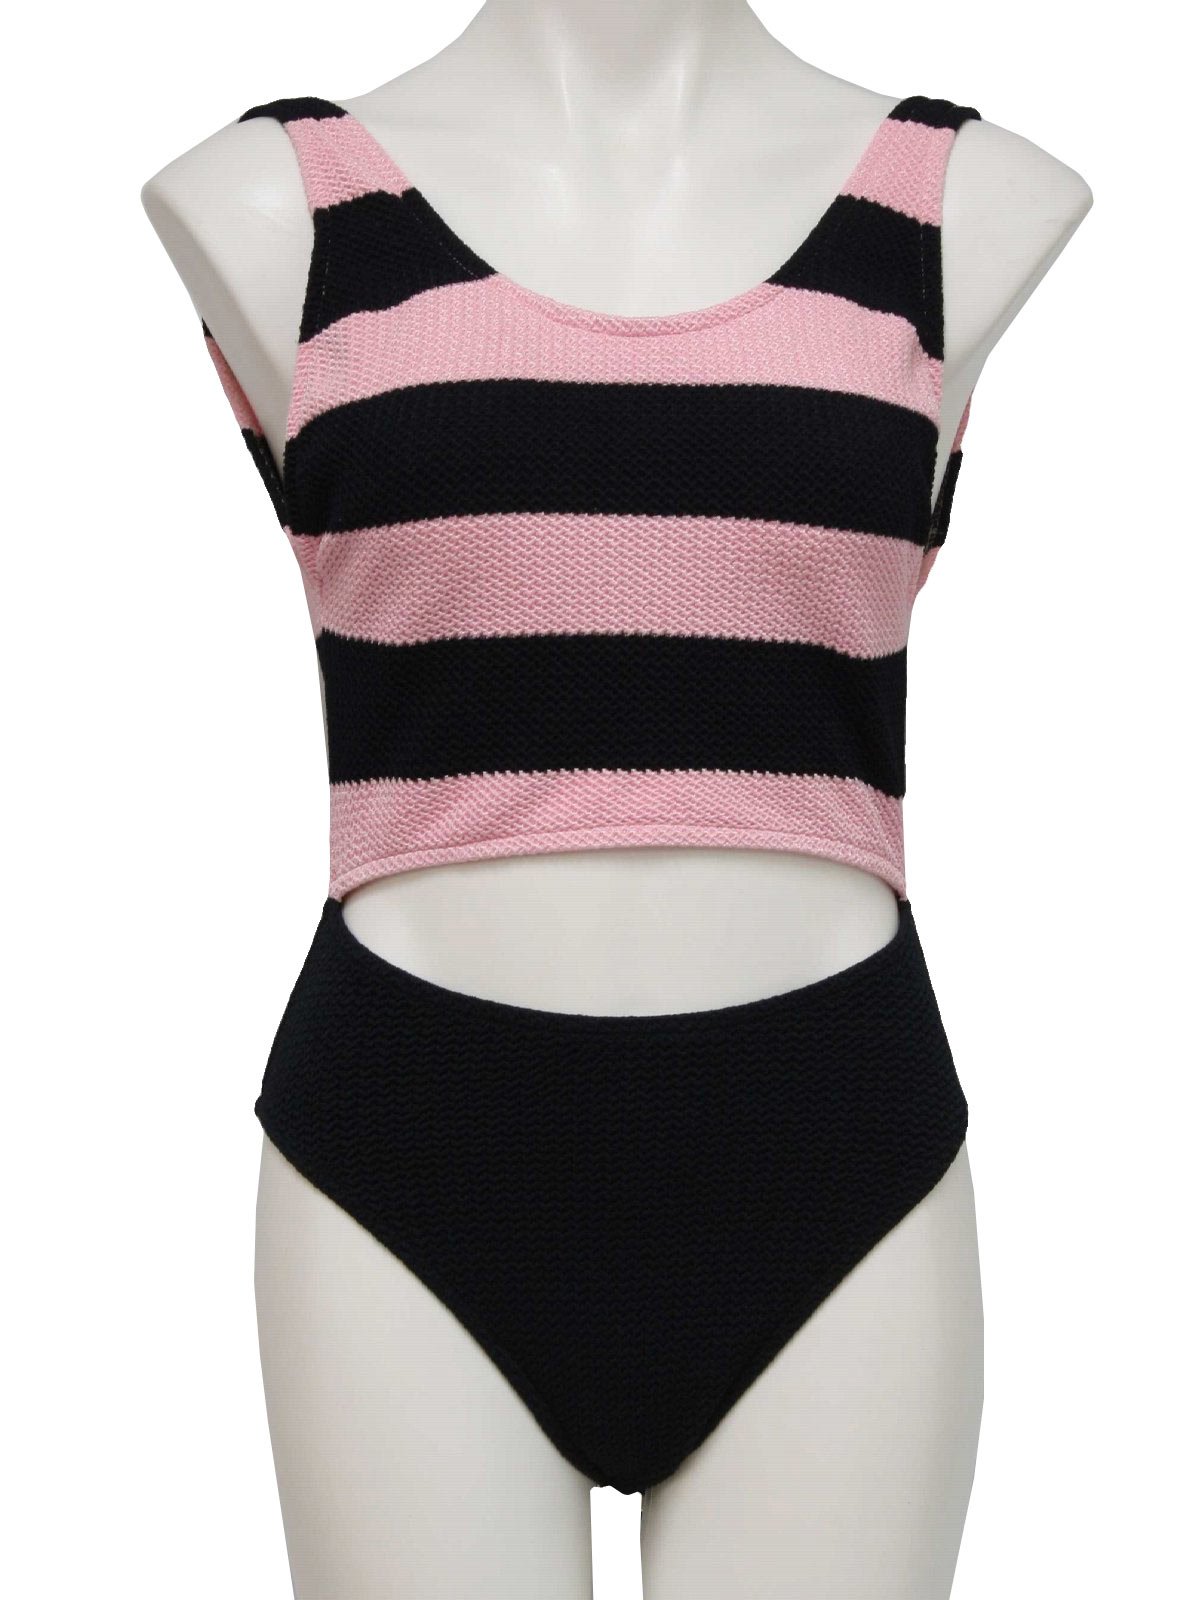 Robby Len Eighties Vintage Swimsuit/Swimwear: 80s -Robby Len- Womens black  and pink polyester and spandex blend swimsuit. One piece with a split two  piece look that reveals the midrift, crochet knit bikini